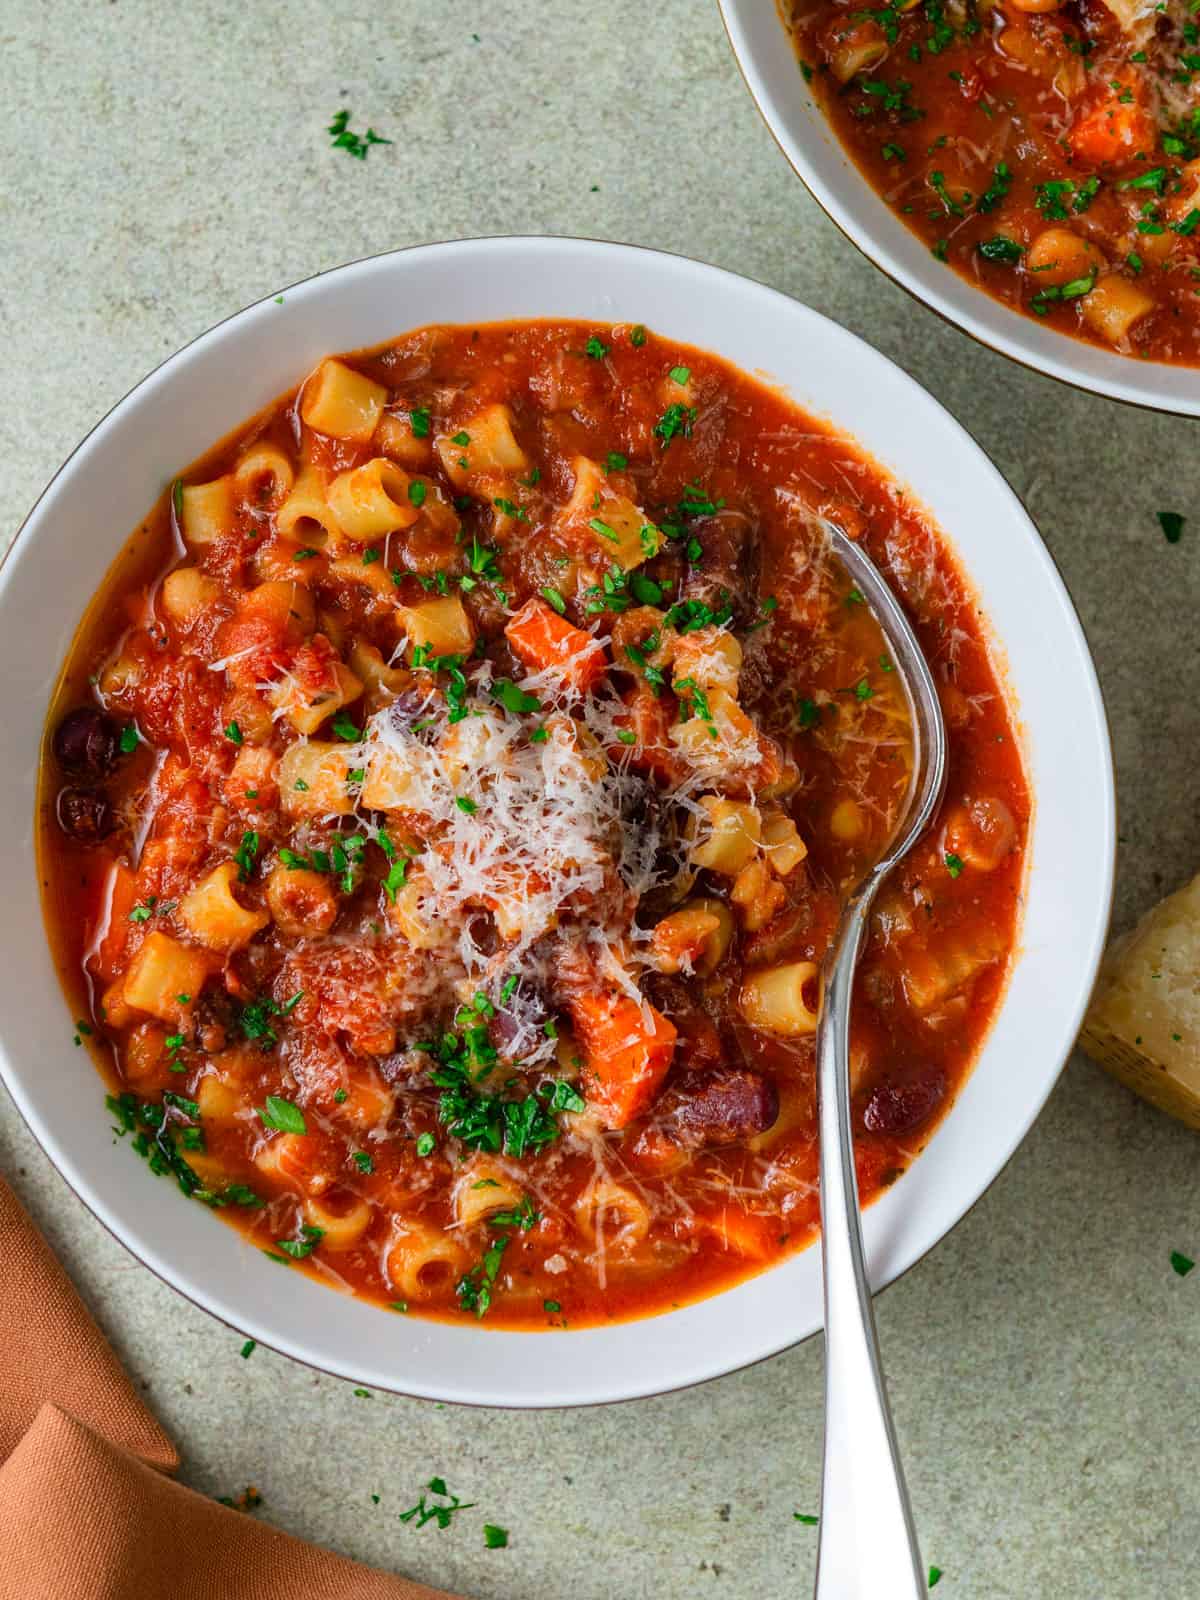 Vegetarian pasta fagioli recipe with beans, vegetables and parmesan.